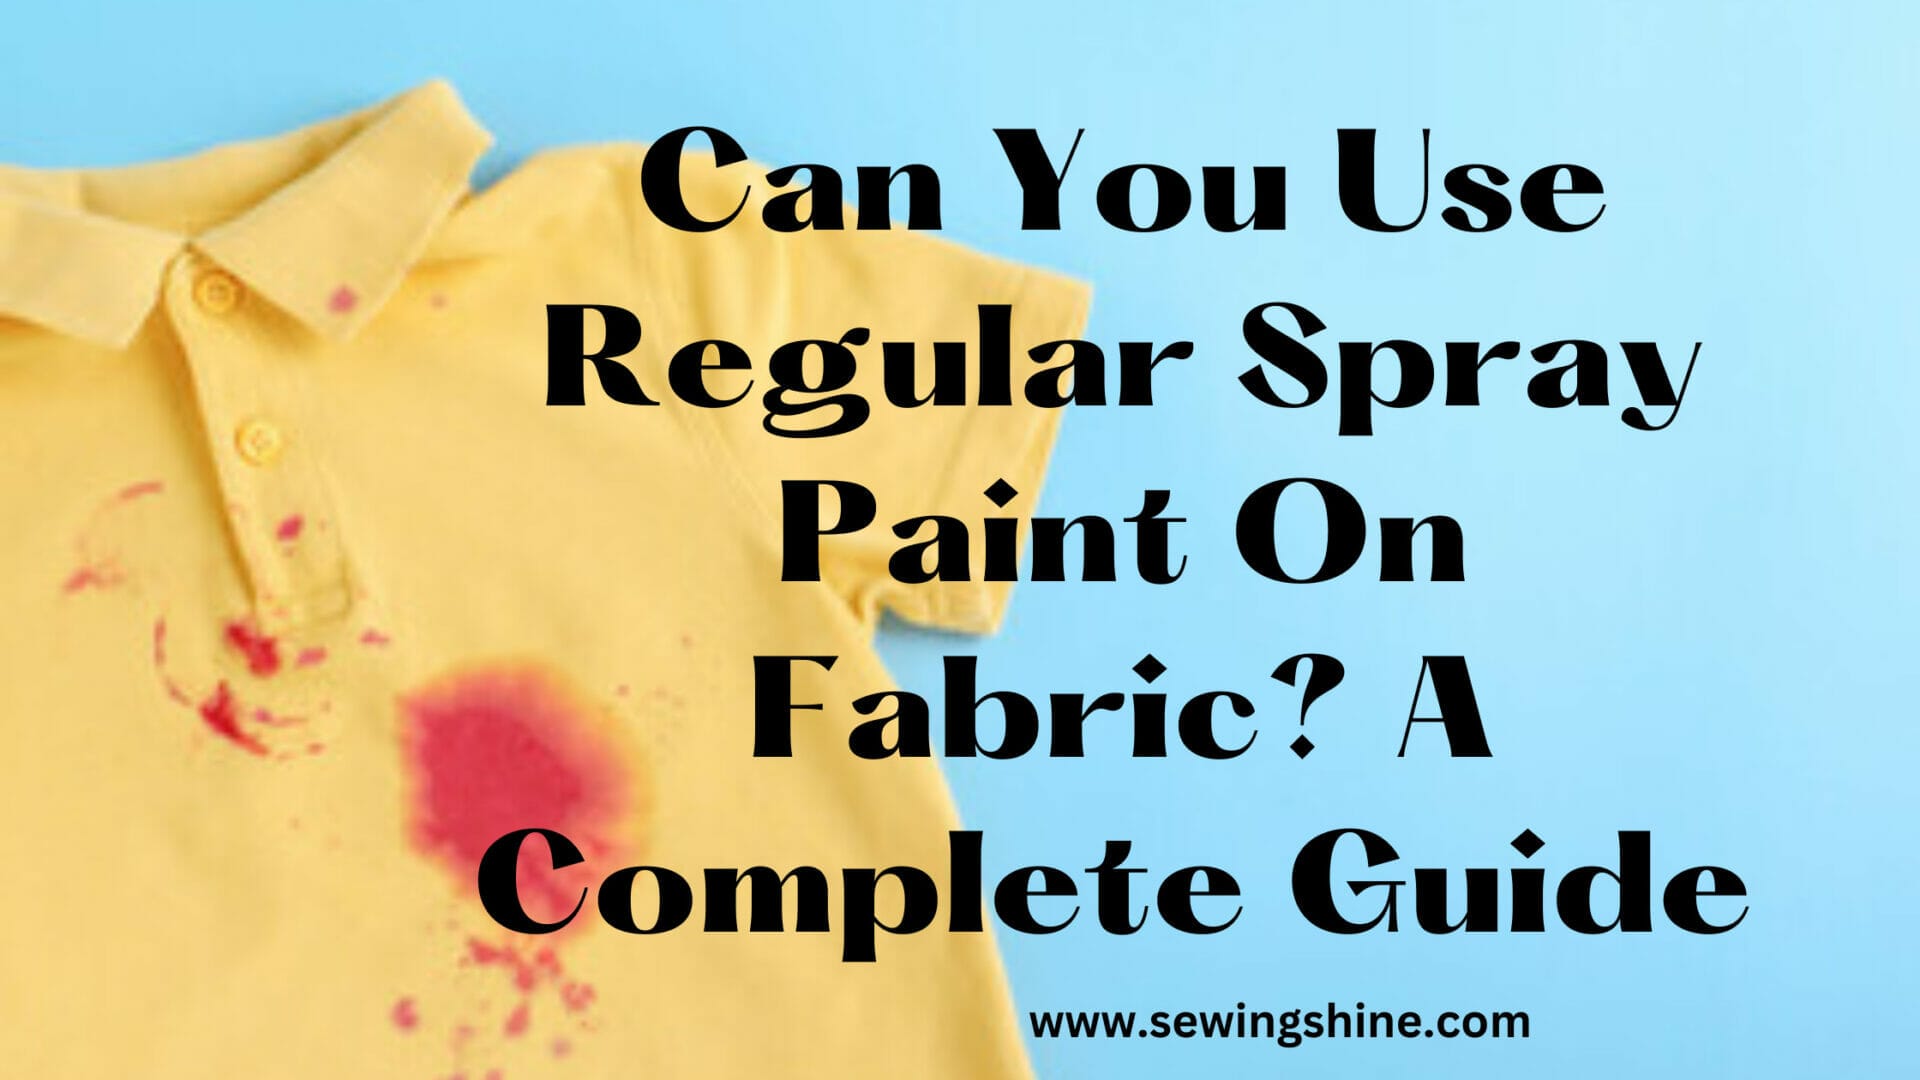 Can You Use Regular Spray Paint On Fabric A Complete Guide 1 